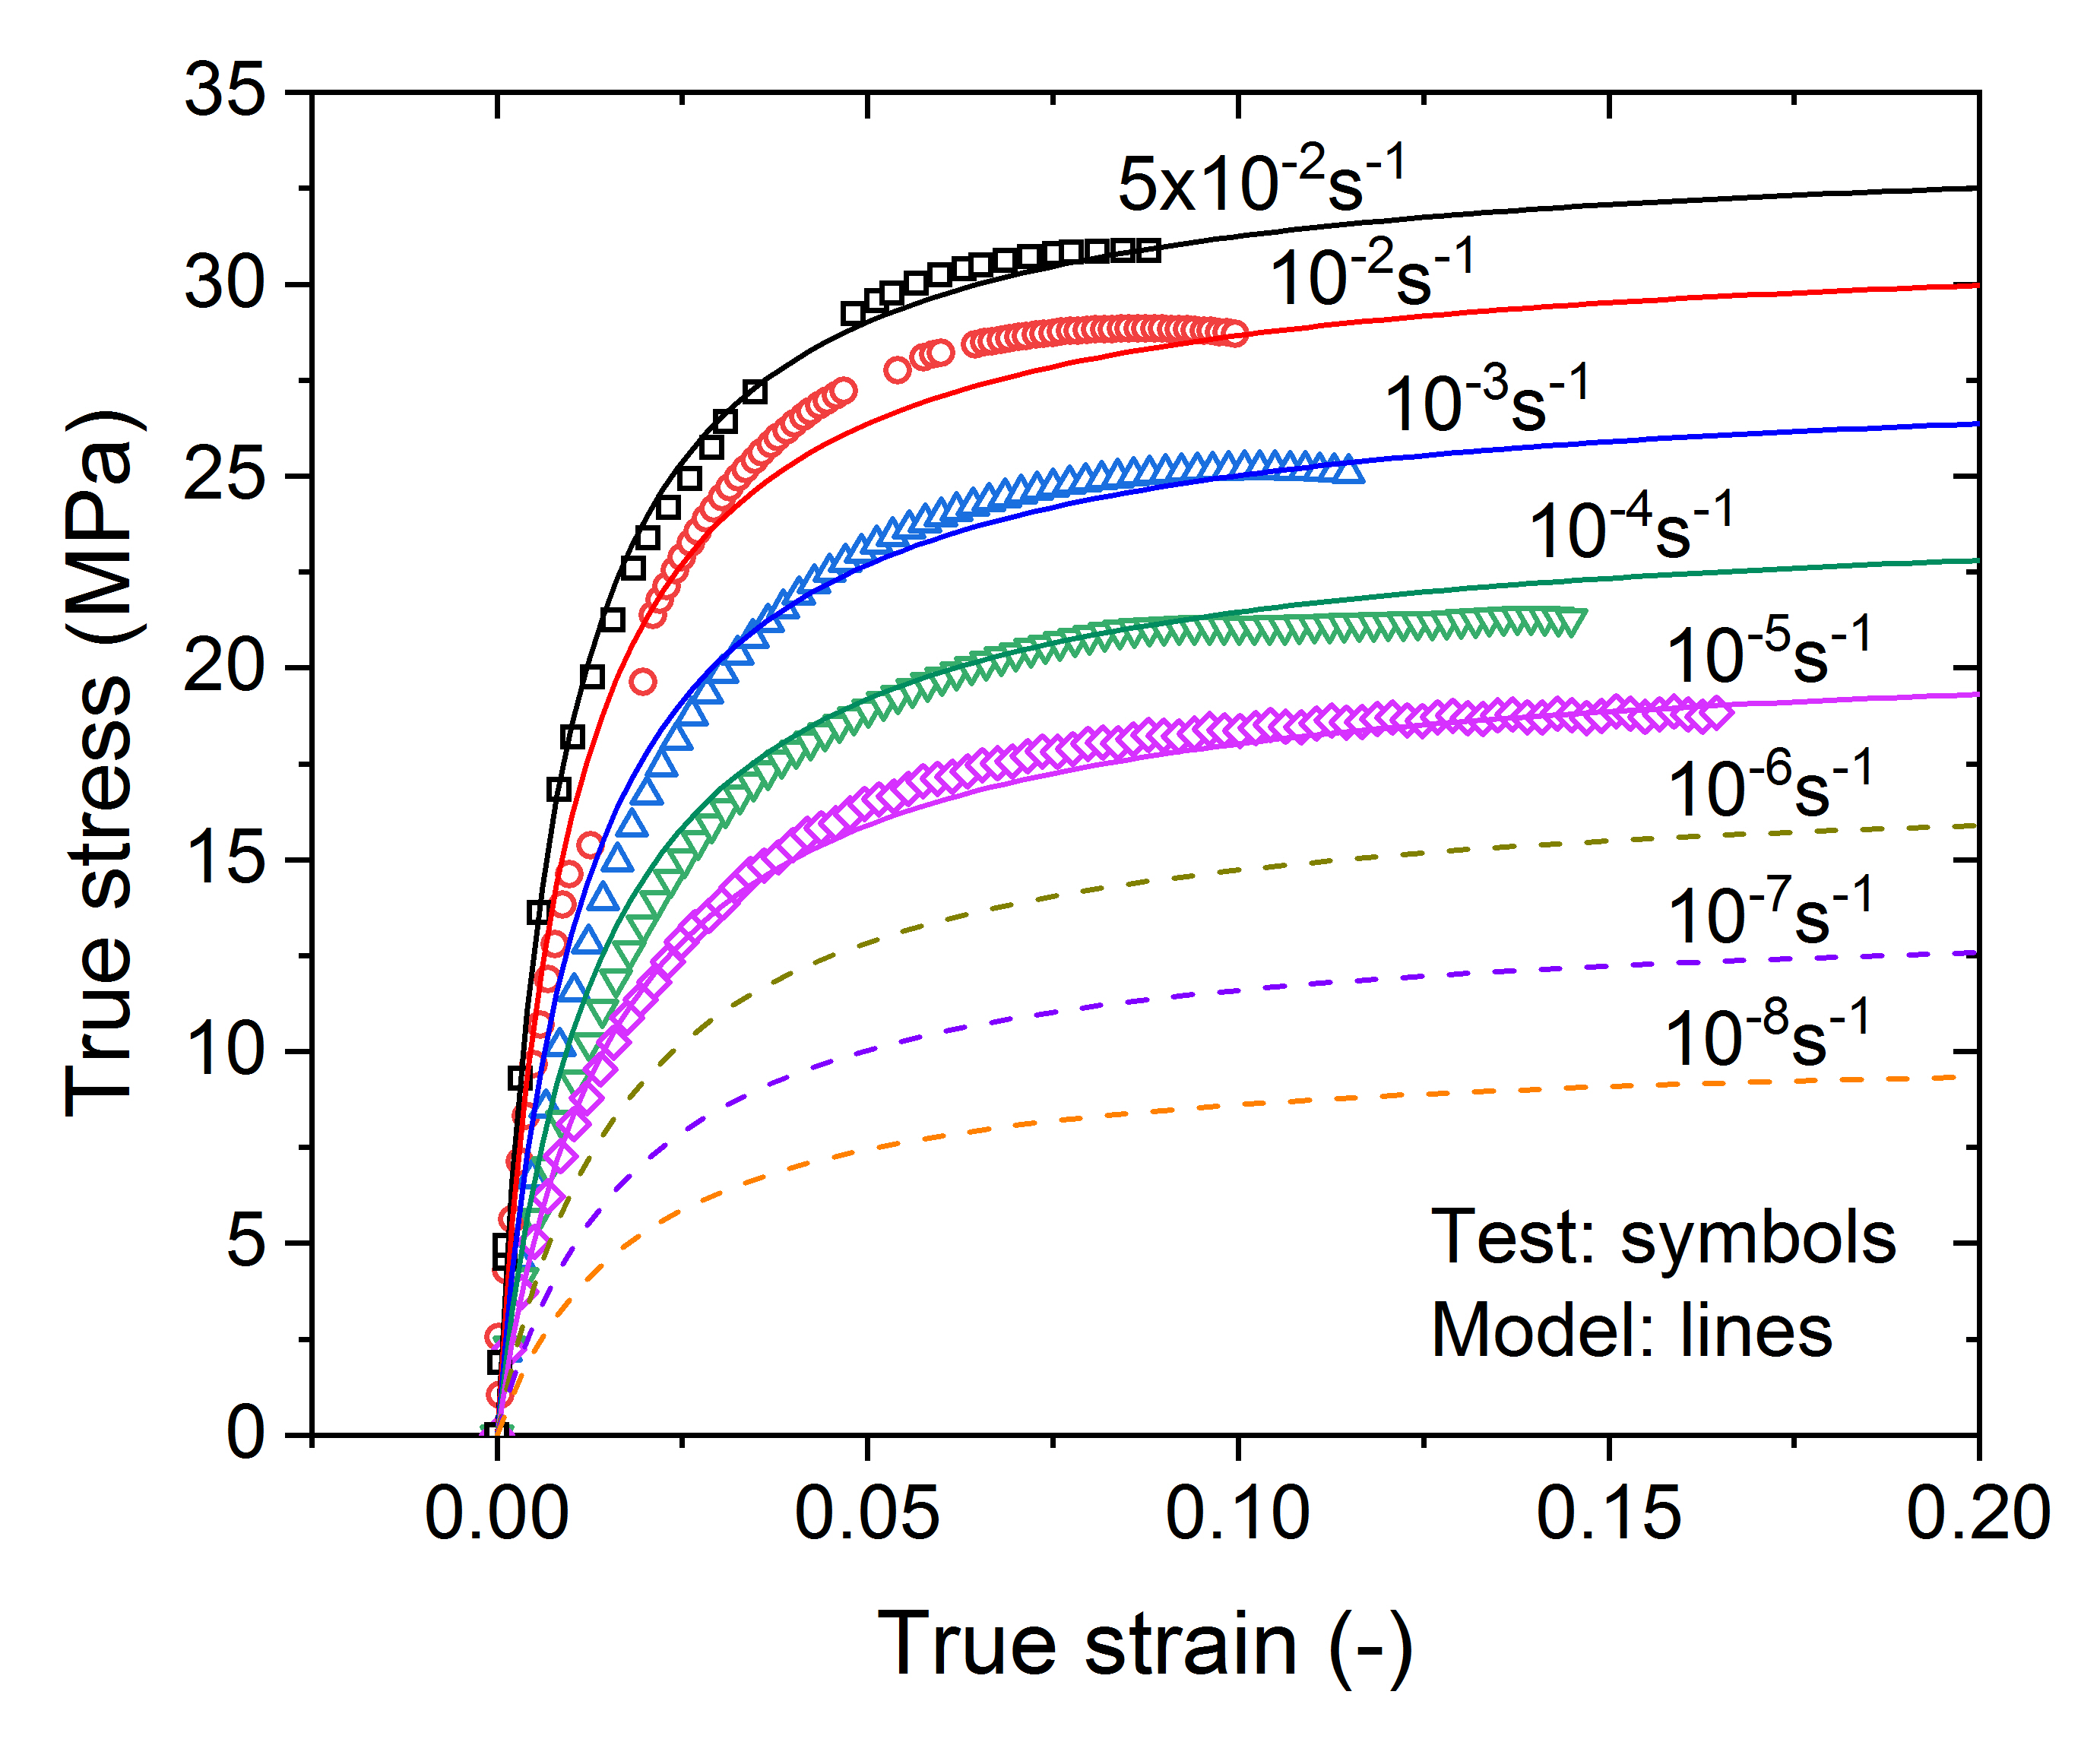 The non-linear behaviors of stress-strain curves for the compression